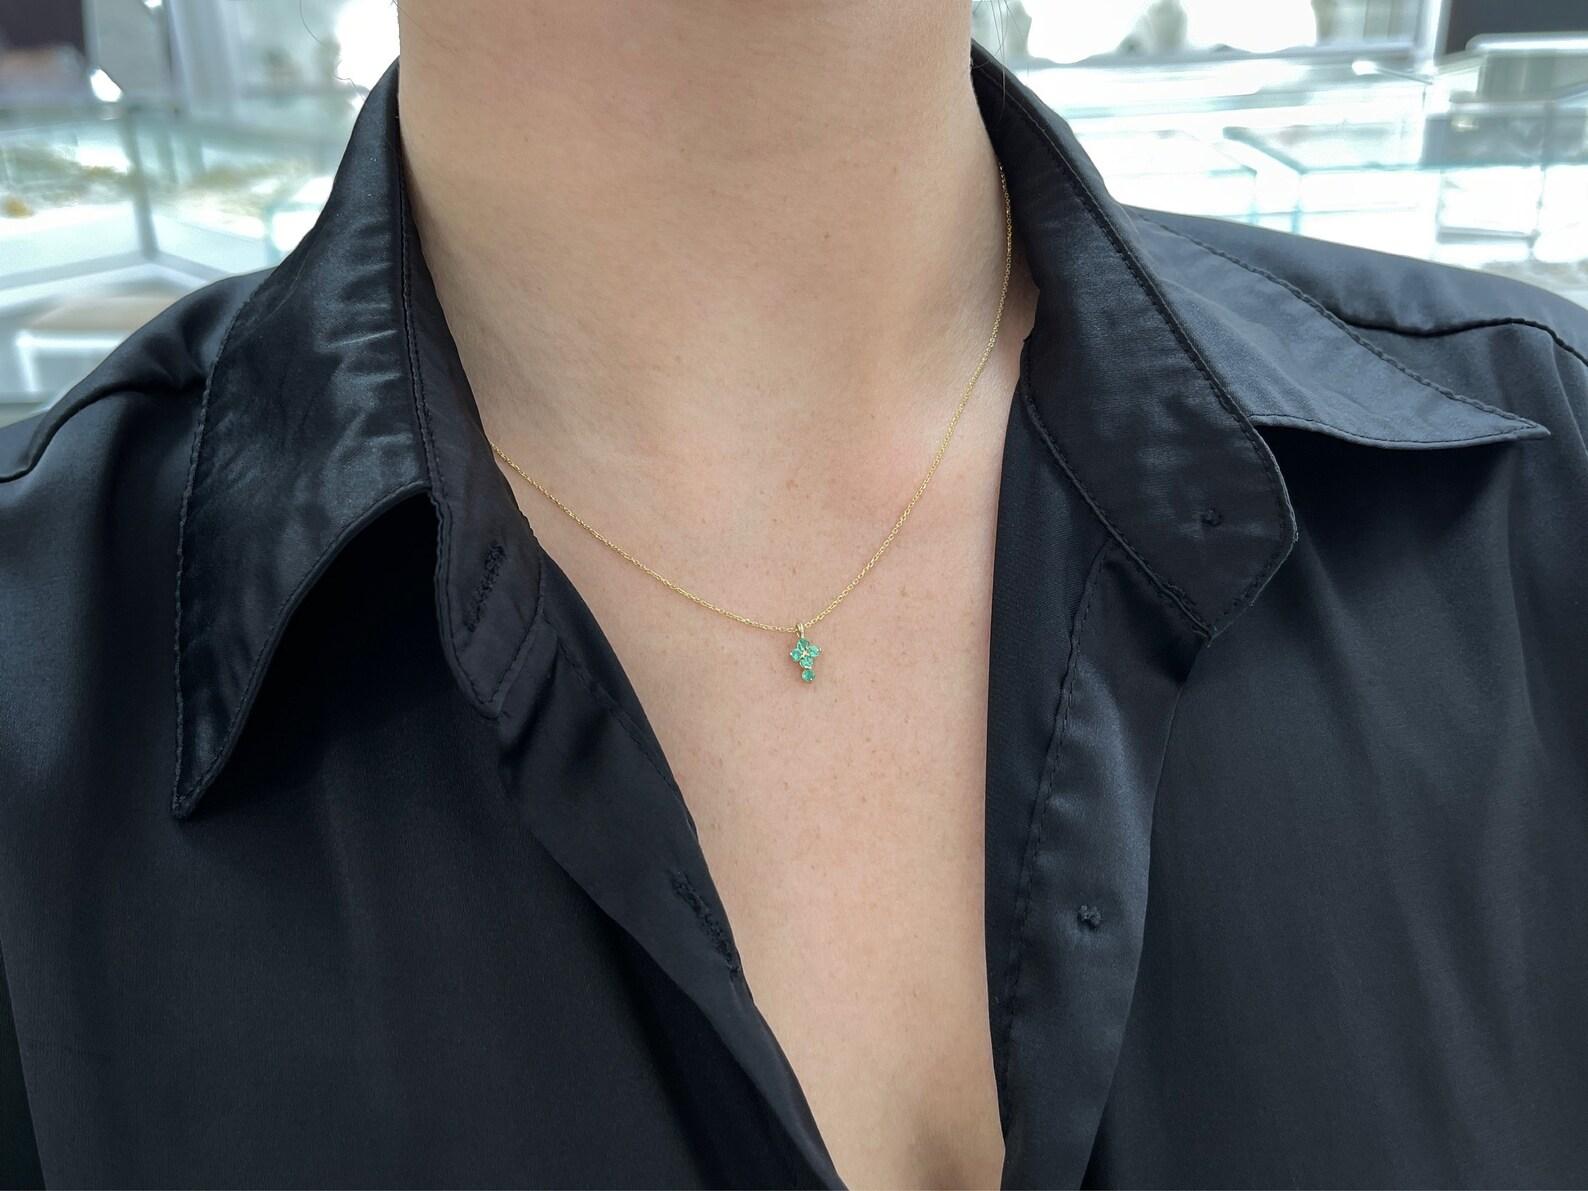 A token of faith, a symbolic emerald cross. This petite necklace features numerous bluish-green emeralds, prong-set in a simple yet beautiful gold prong setting. Crafted in 14K gold, and ideal for everyday wear and stacking.

*Chain sold